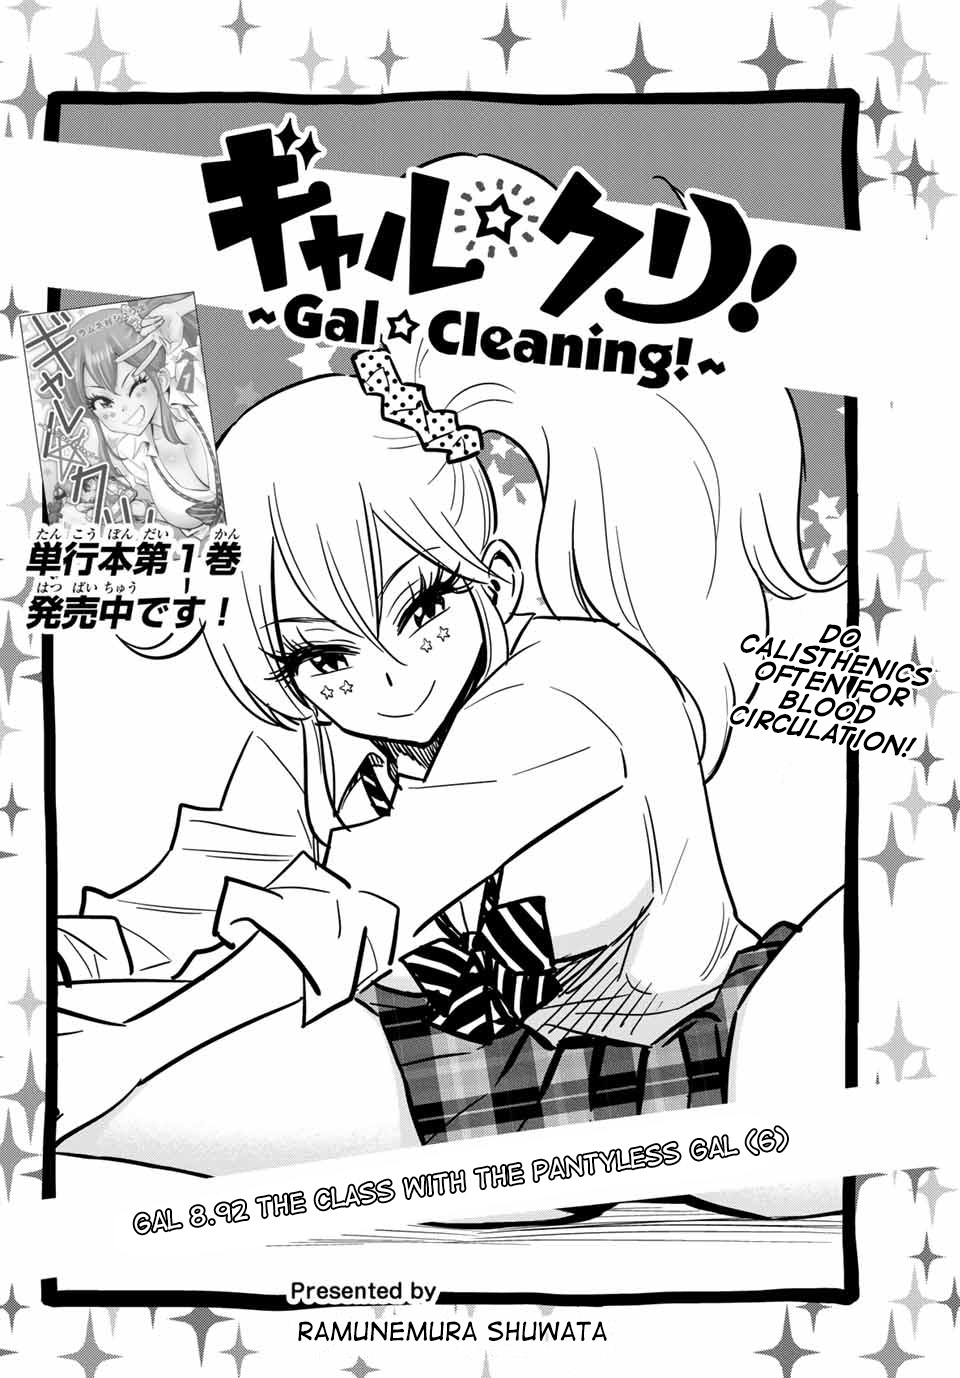 Gal☆Clea! - chapter 8.92 - #2